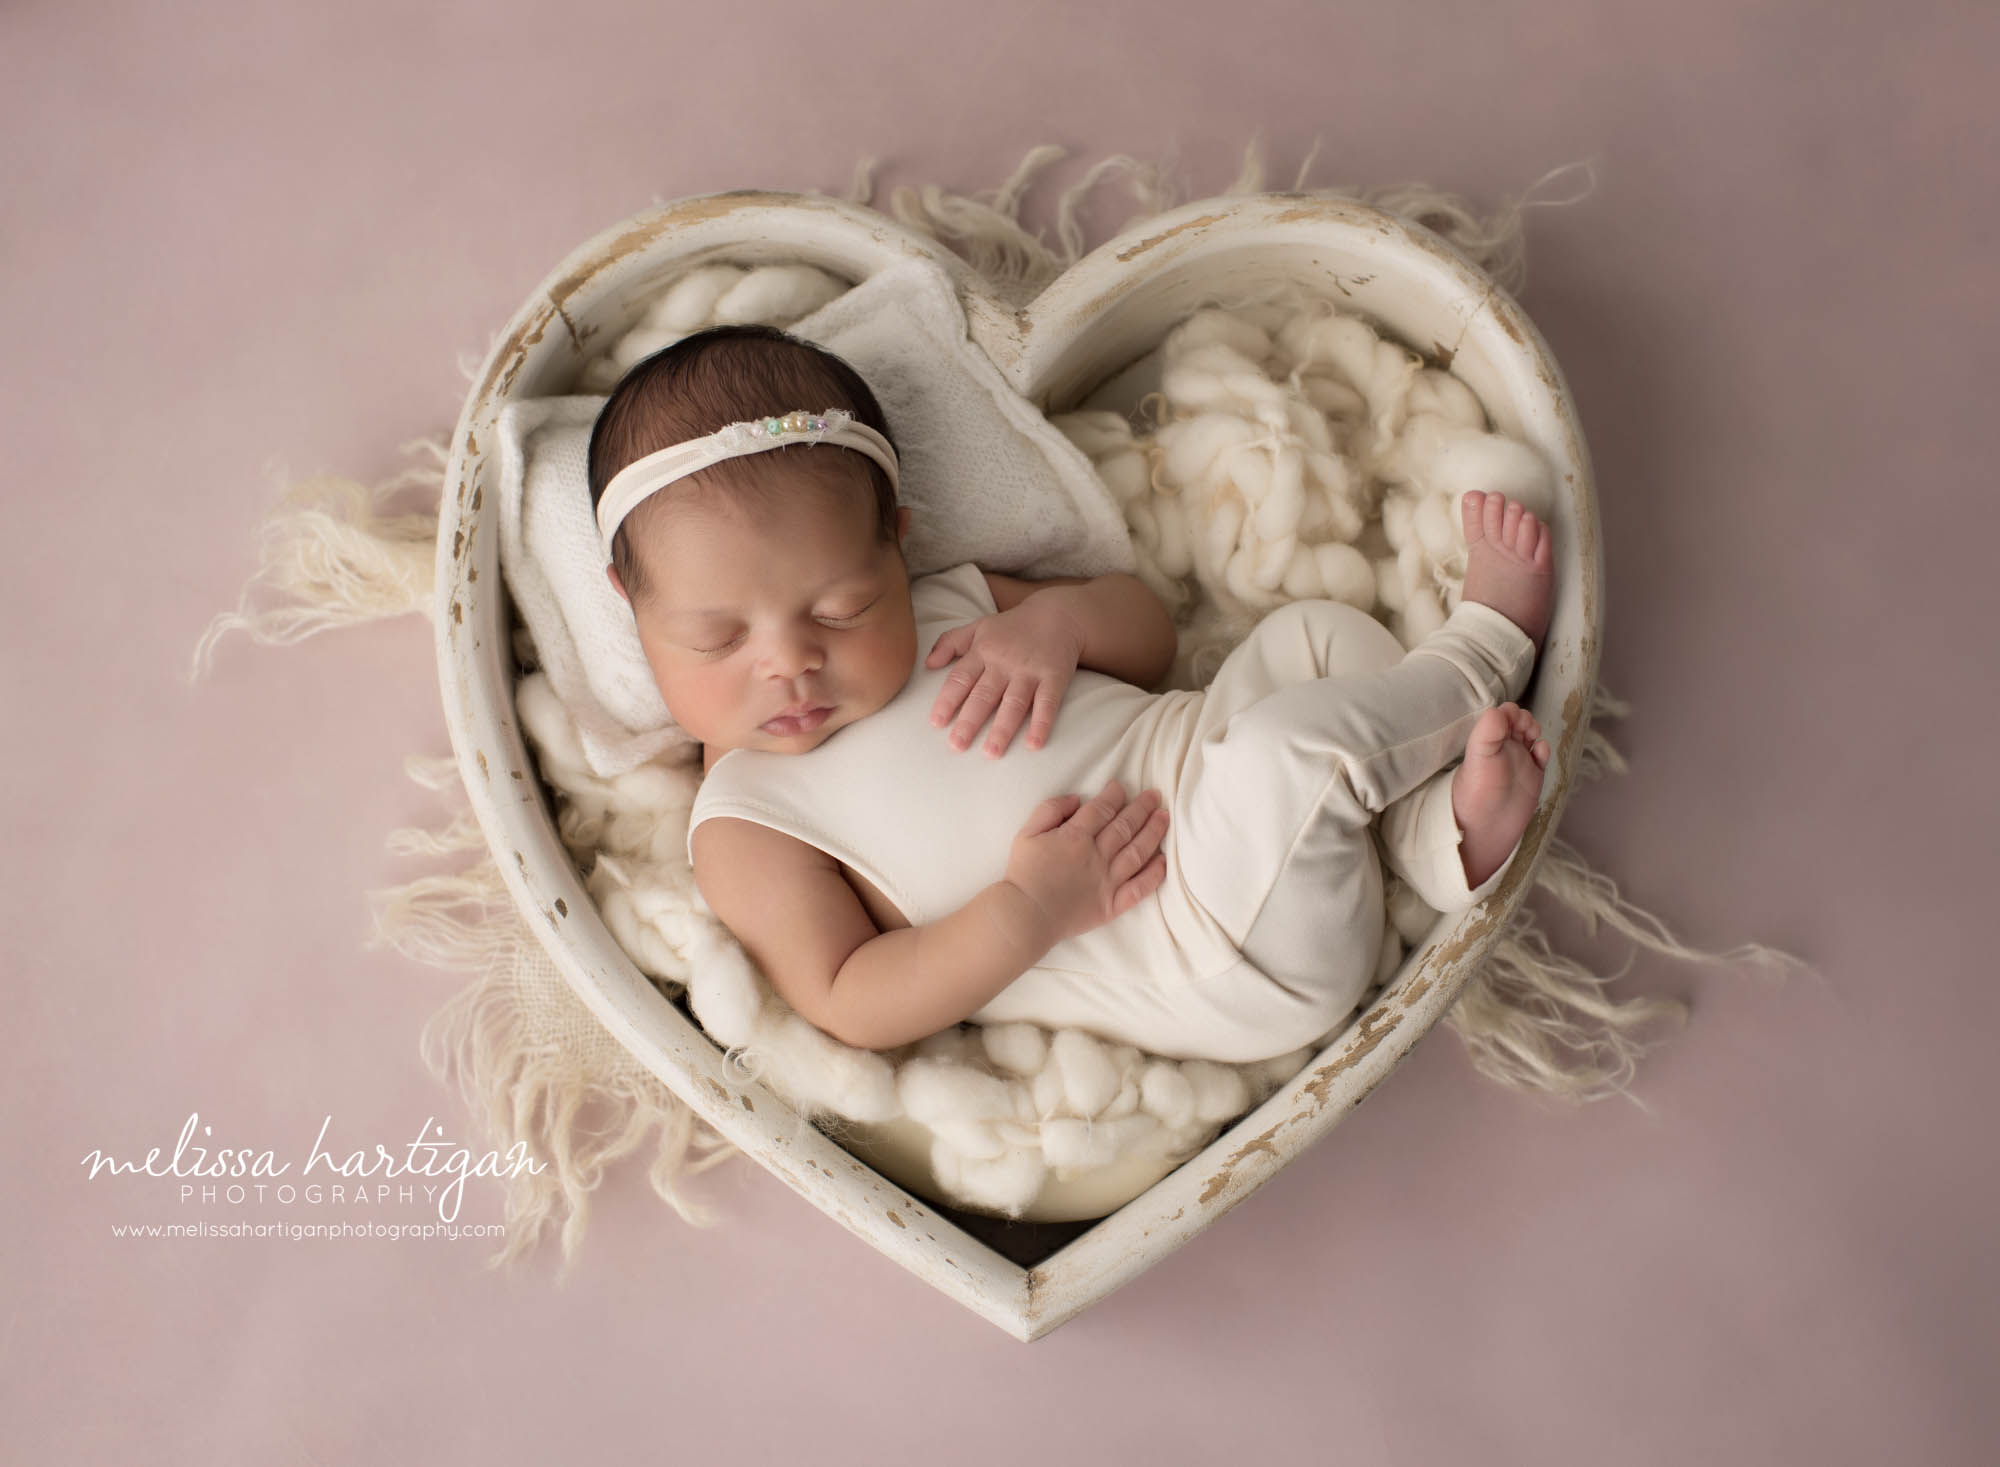 newborn baby girl posed in wooden heart bowl wearing cream baby girl outfit and headband